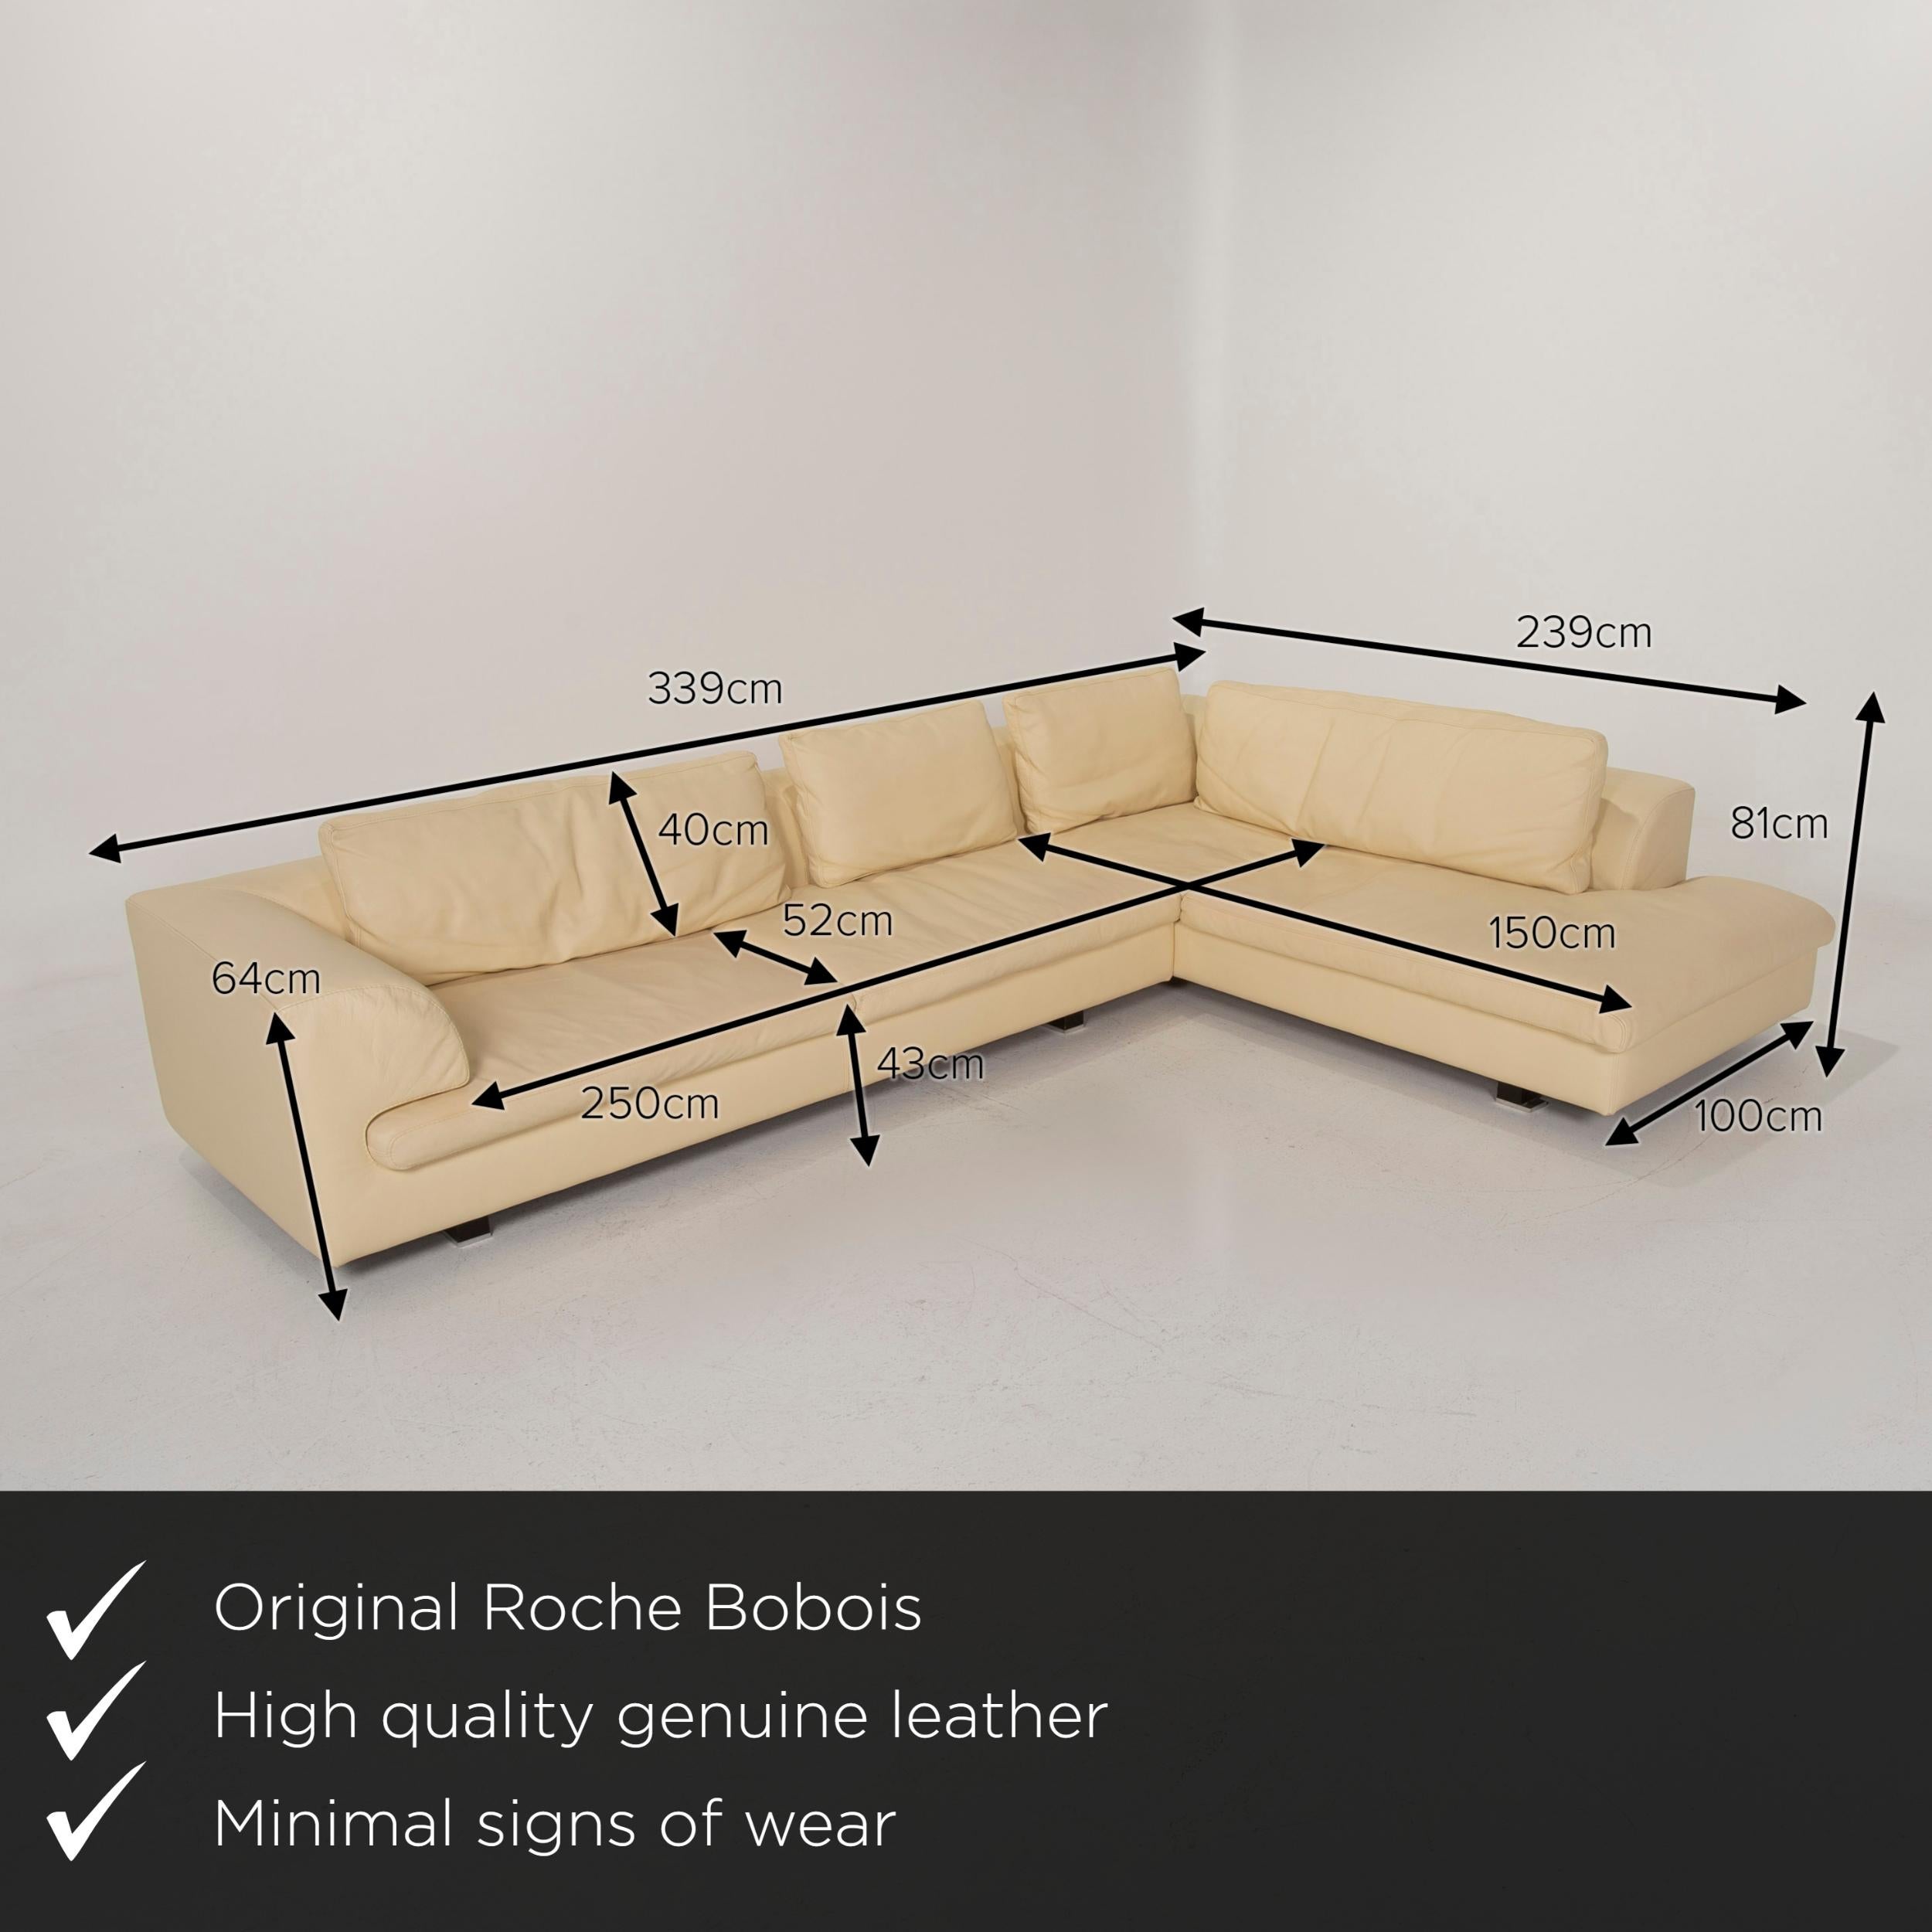 We present to you a Roche Bobois leather sofa beige corner sofa.

Product measurements in centimeters:

Depth: 100
Width: 339
Height: 81
Seat height: 43
Rest height: 64
Seat depth: 52
Seat width: 250
Back height: 40.

    